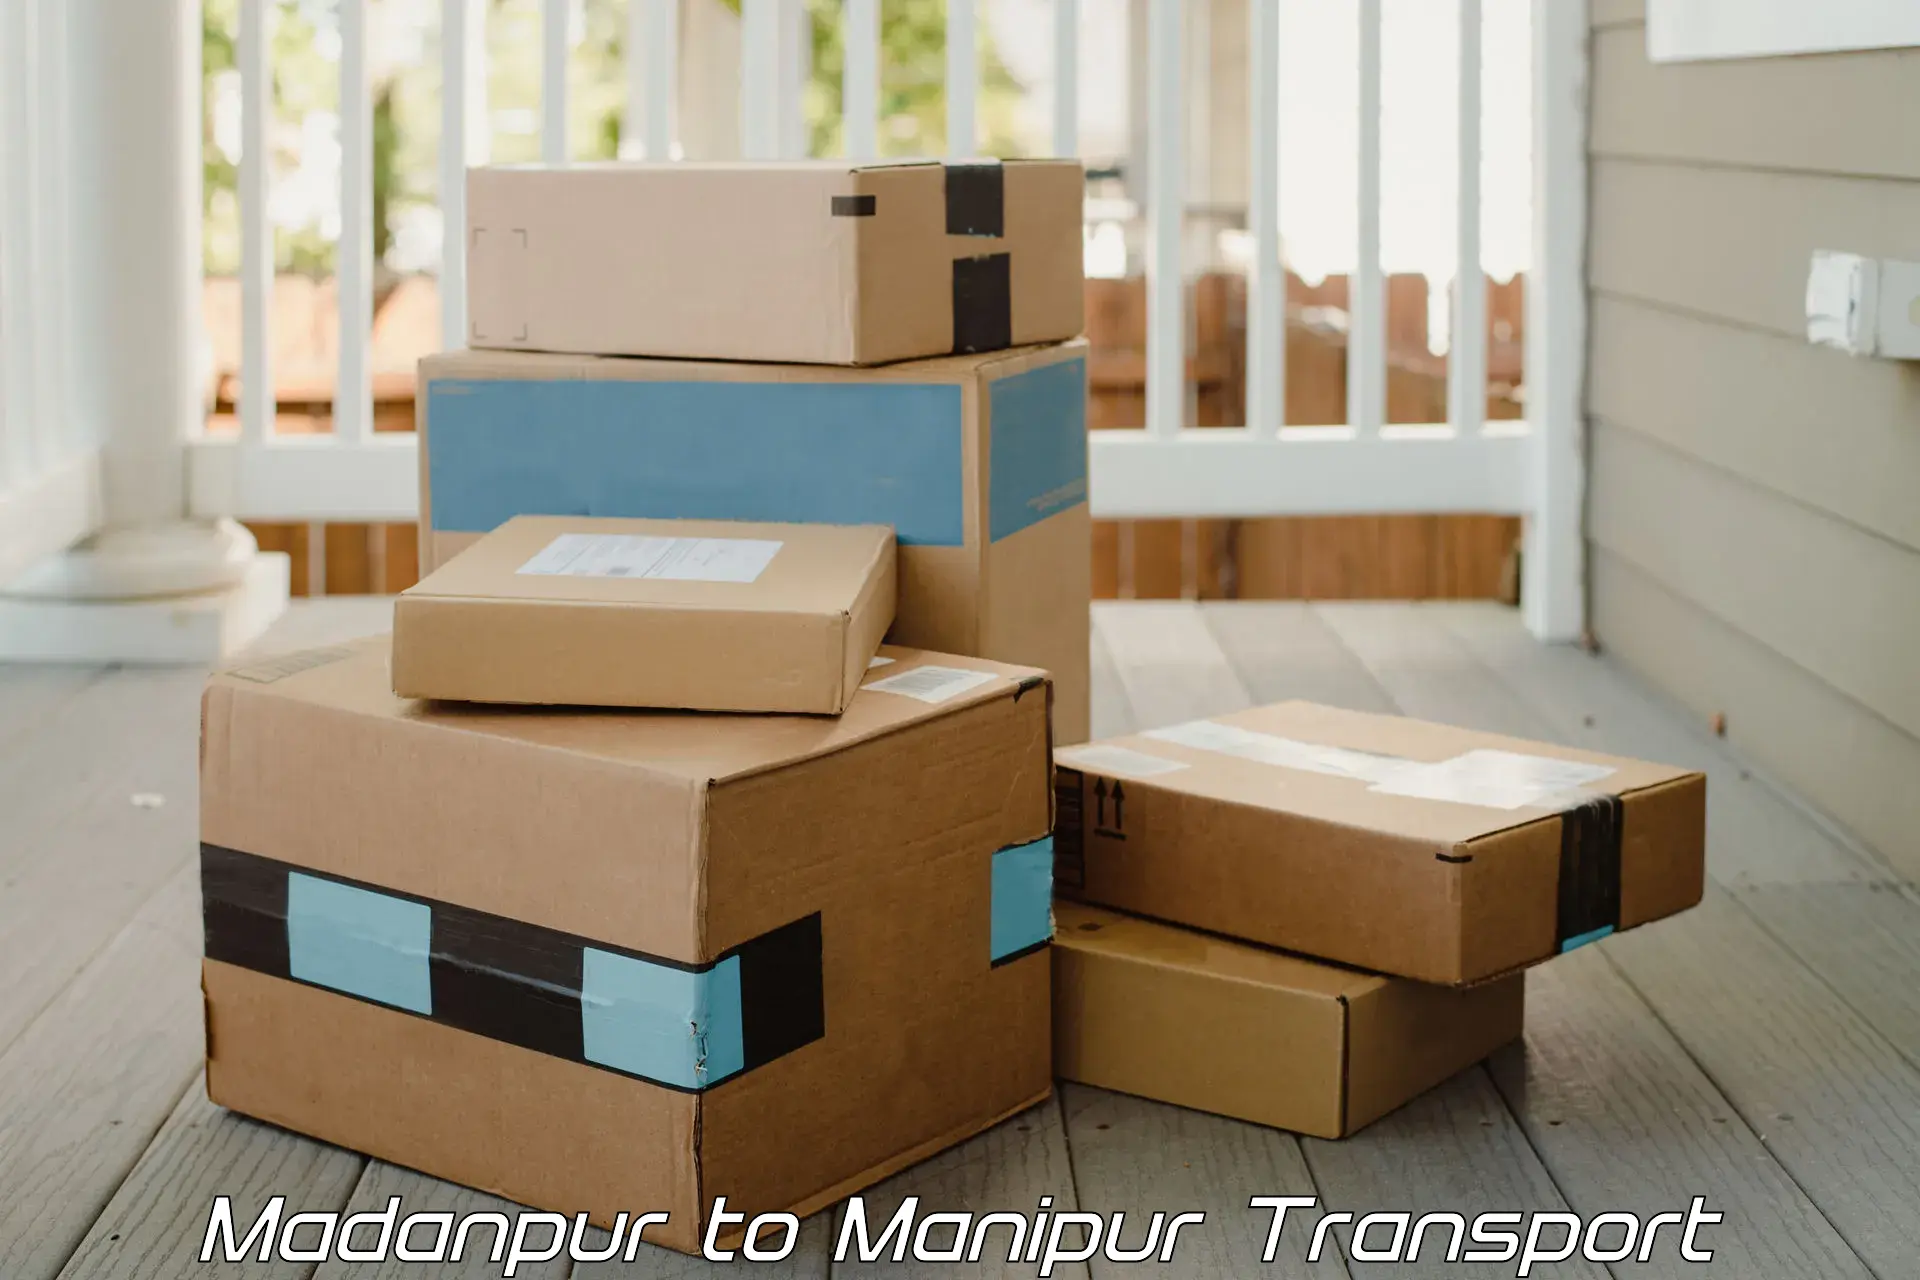 Shipping partner Madanpur to Chandel